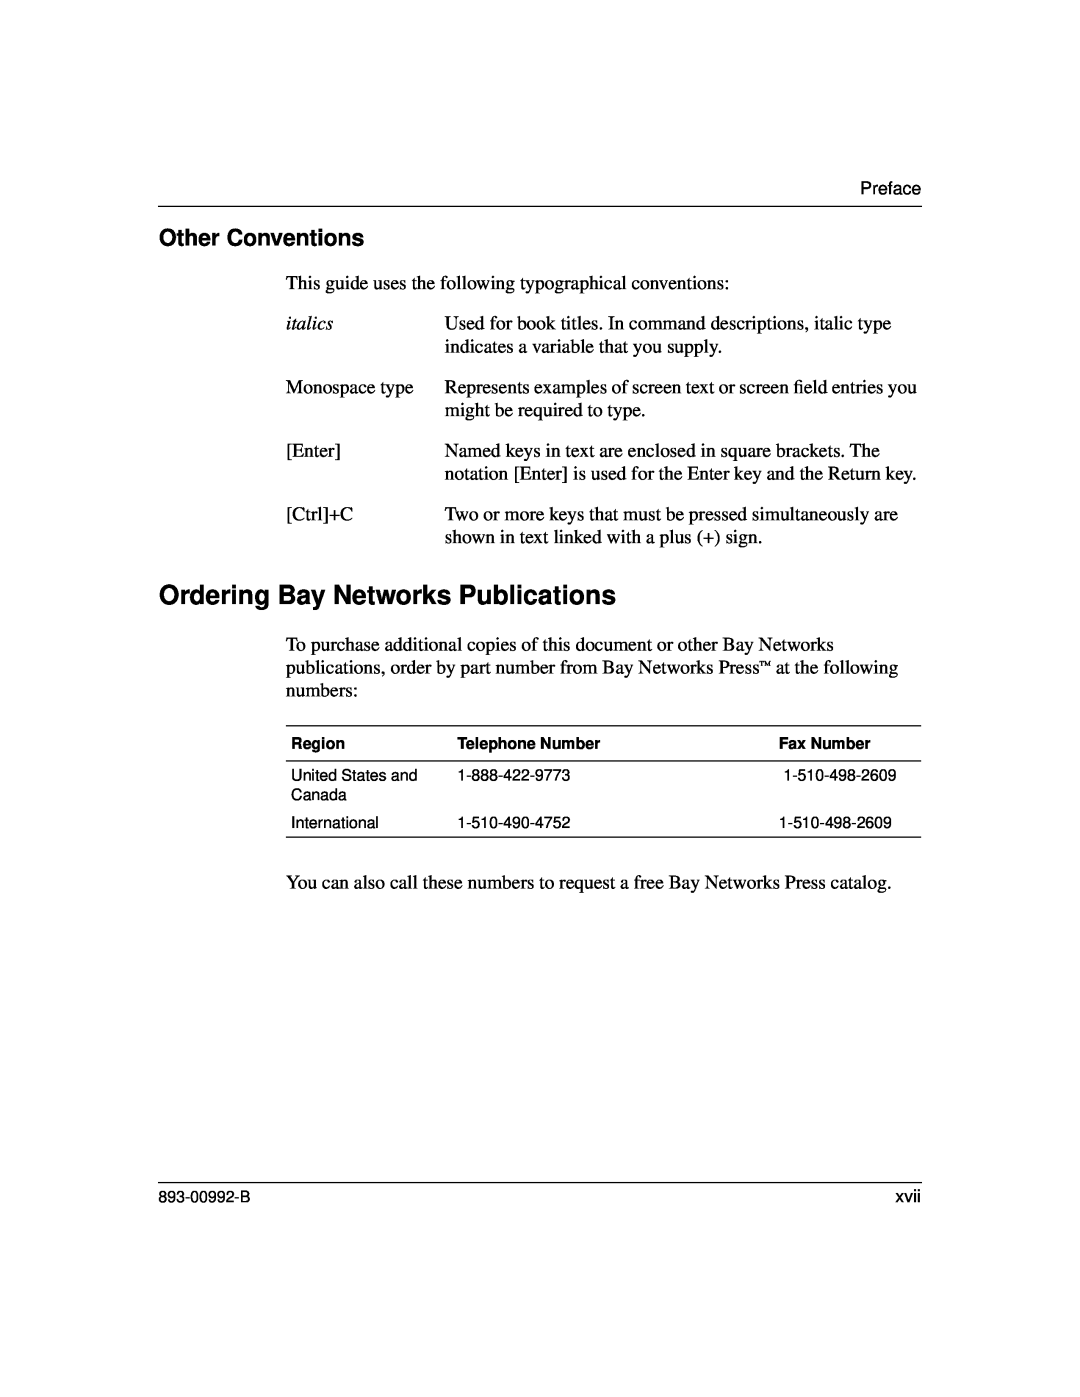 Bay Technical Associates 350 manual Ordering Bay Networks Publications, Other Conventions 